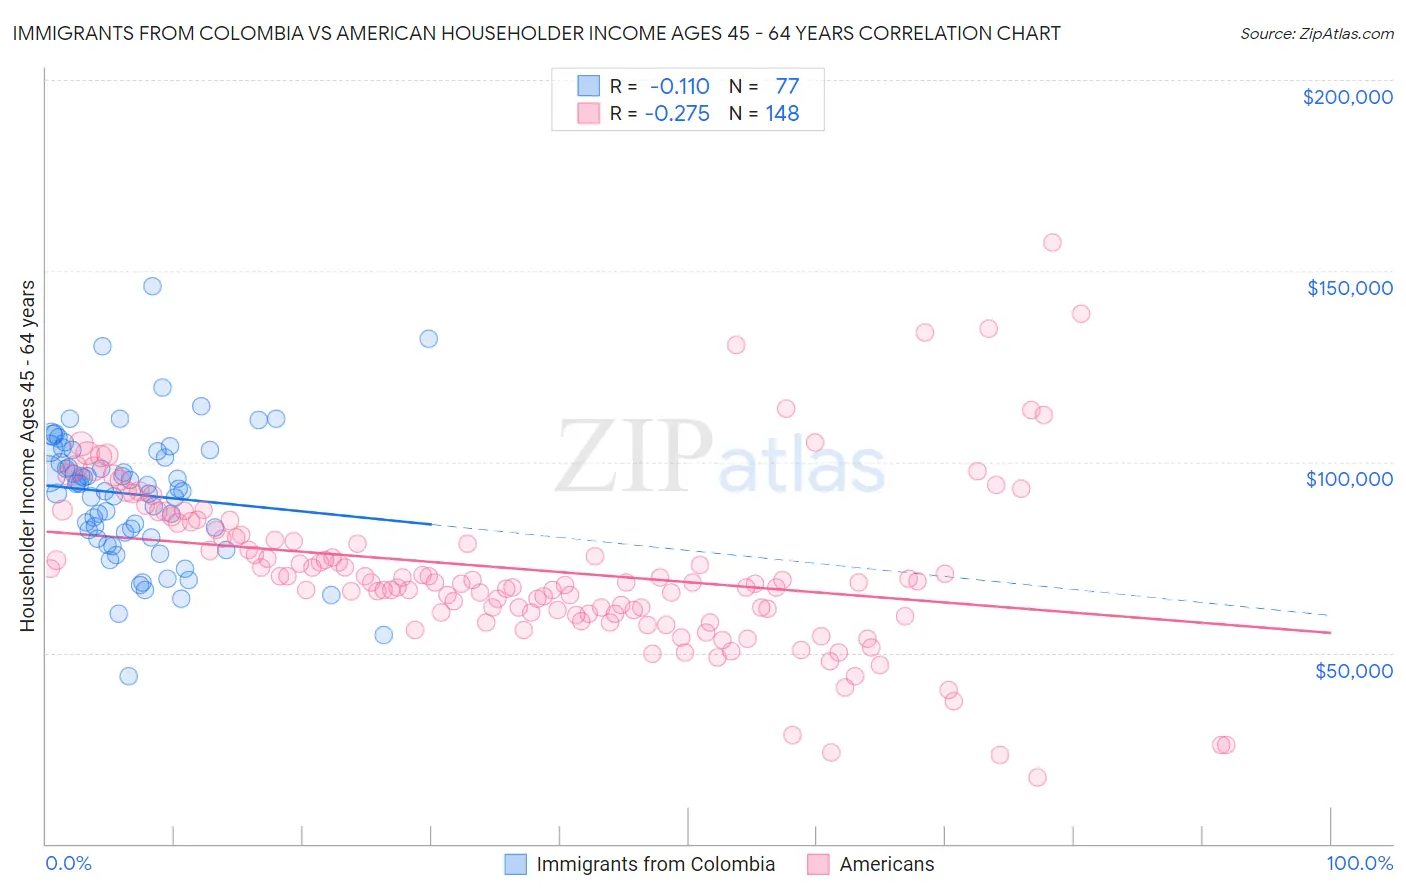 Immigrants from Colombia vs American Householder Income Ages 45 - 64 years